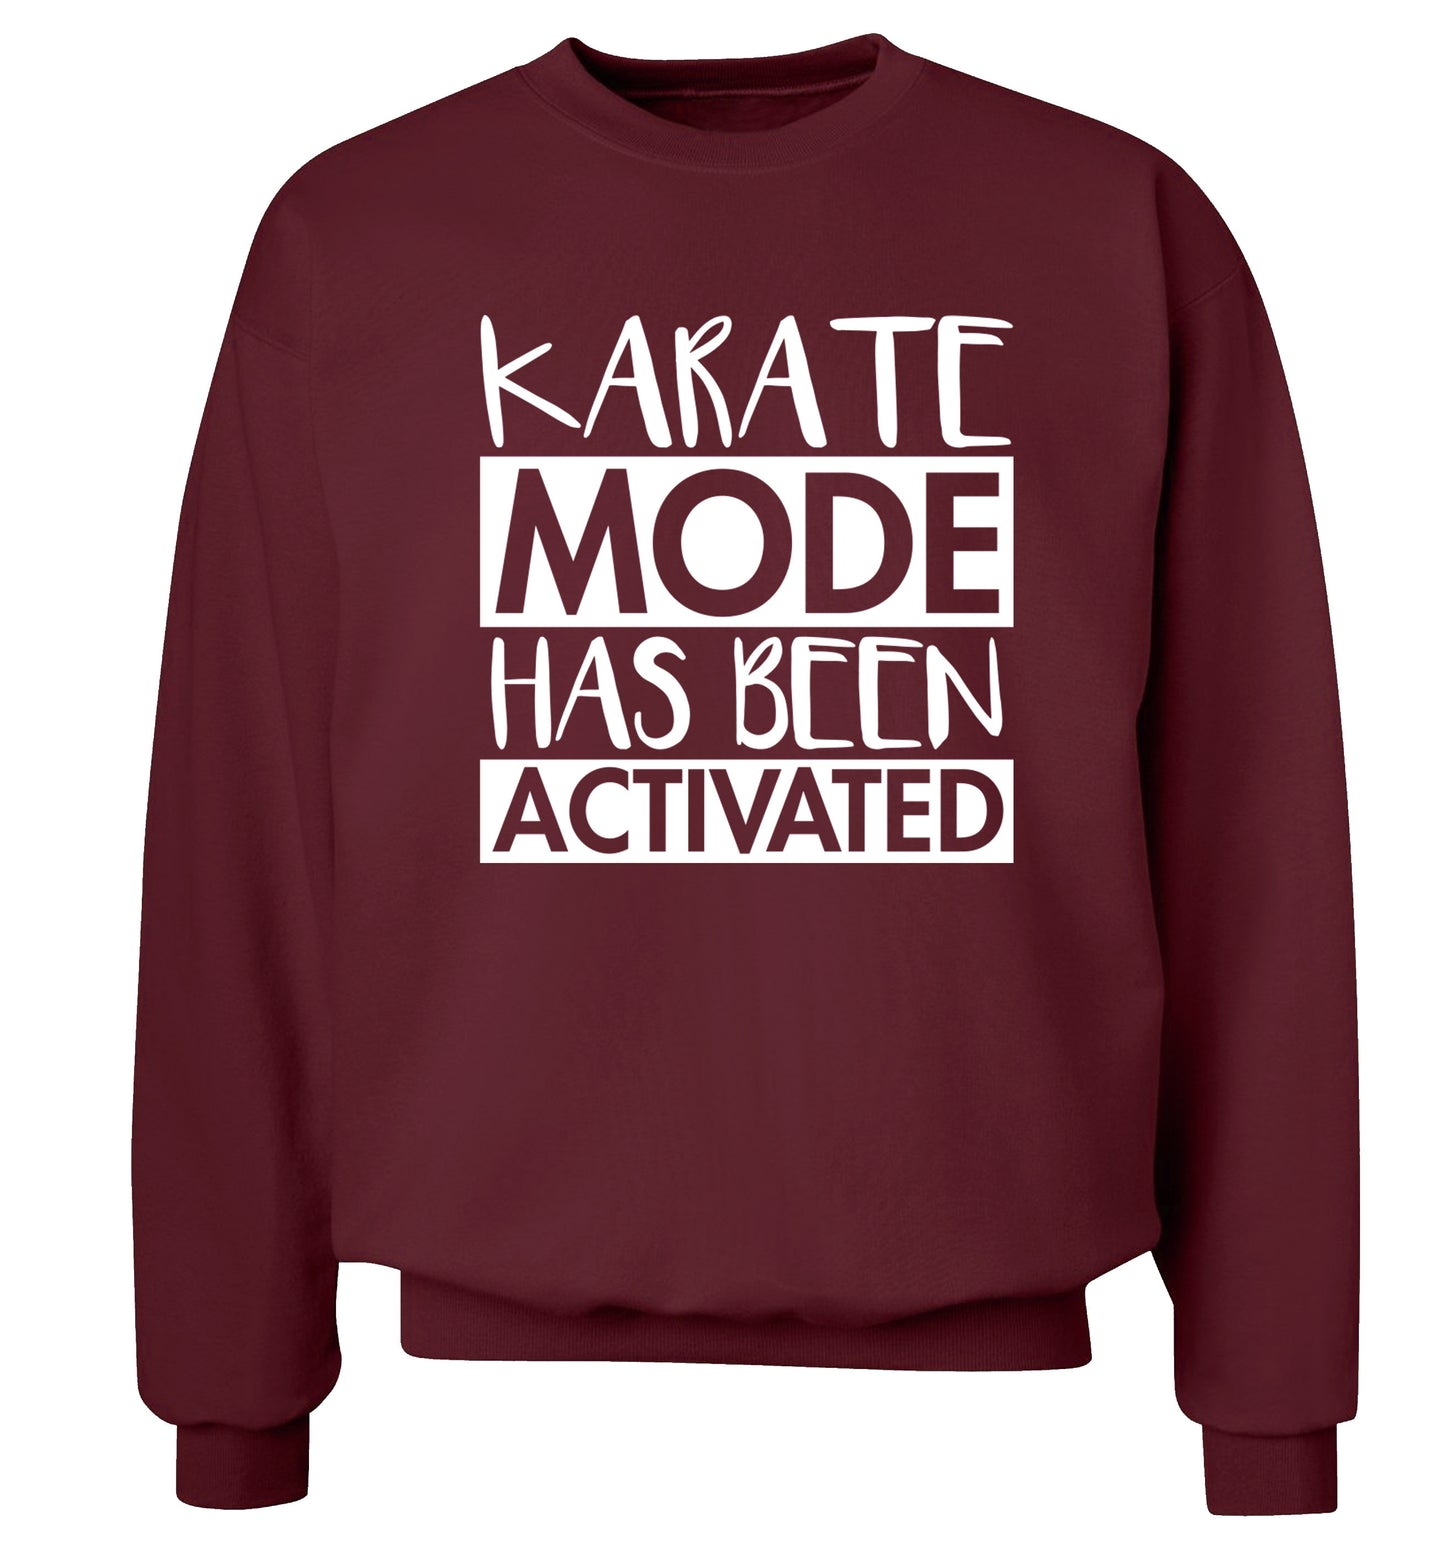 Karate mode activated Adult's unisex maroon Sweater 2XL